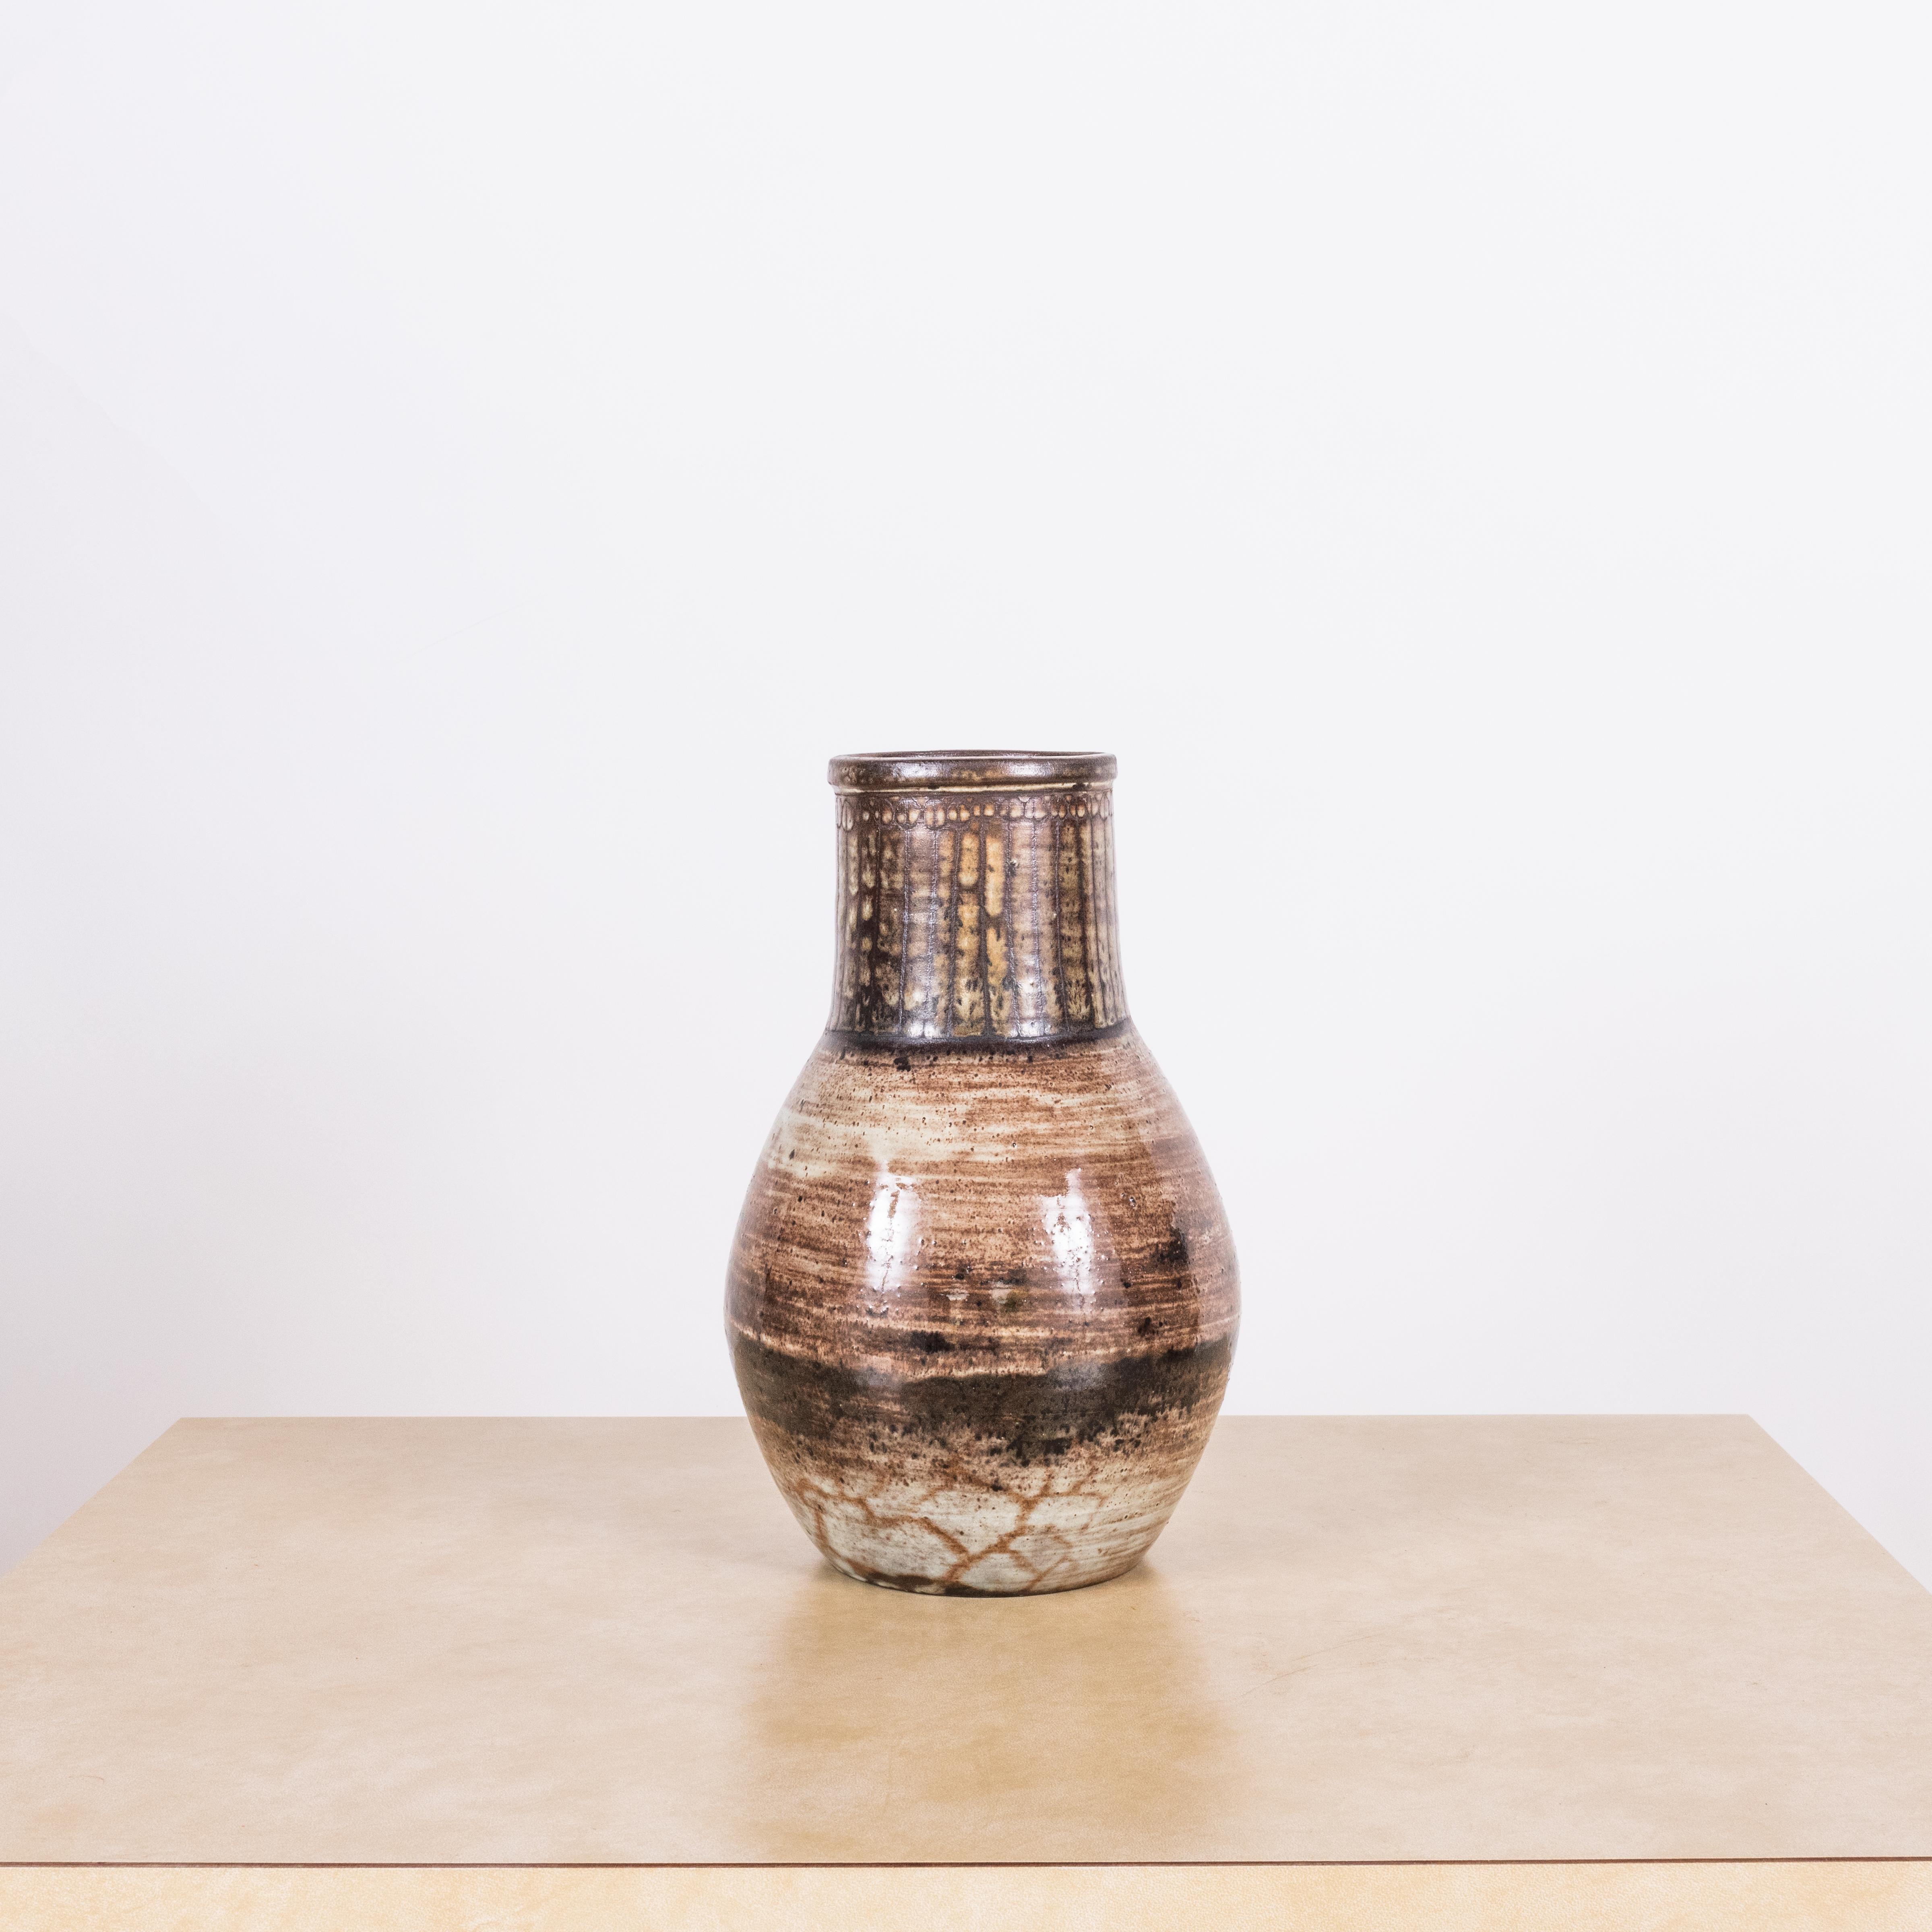 Important French Glazed Ceramic Vase by Jacques Pouchain - Atelier Dieulefit In Excellent Condition For Sale In Los Angeles, CA